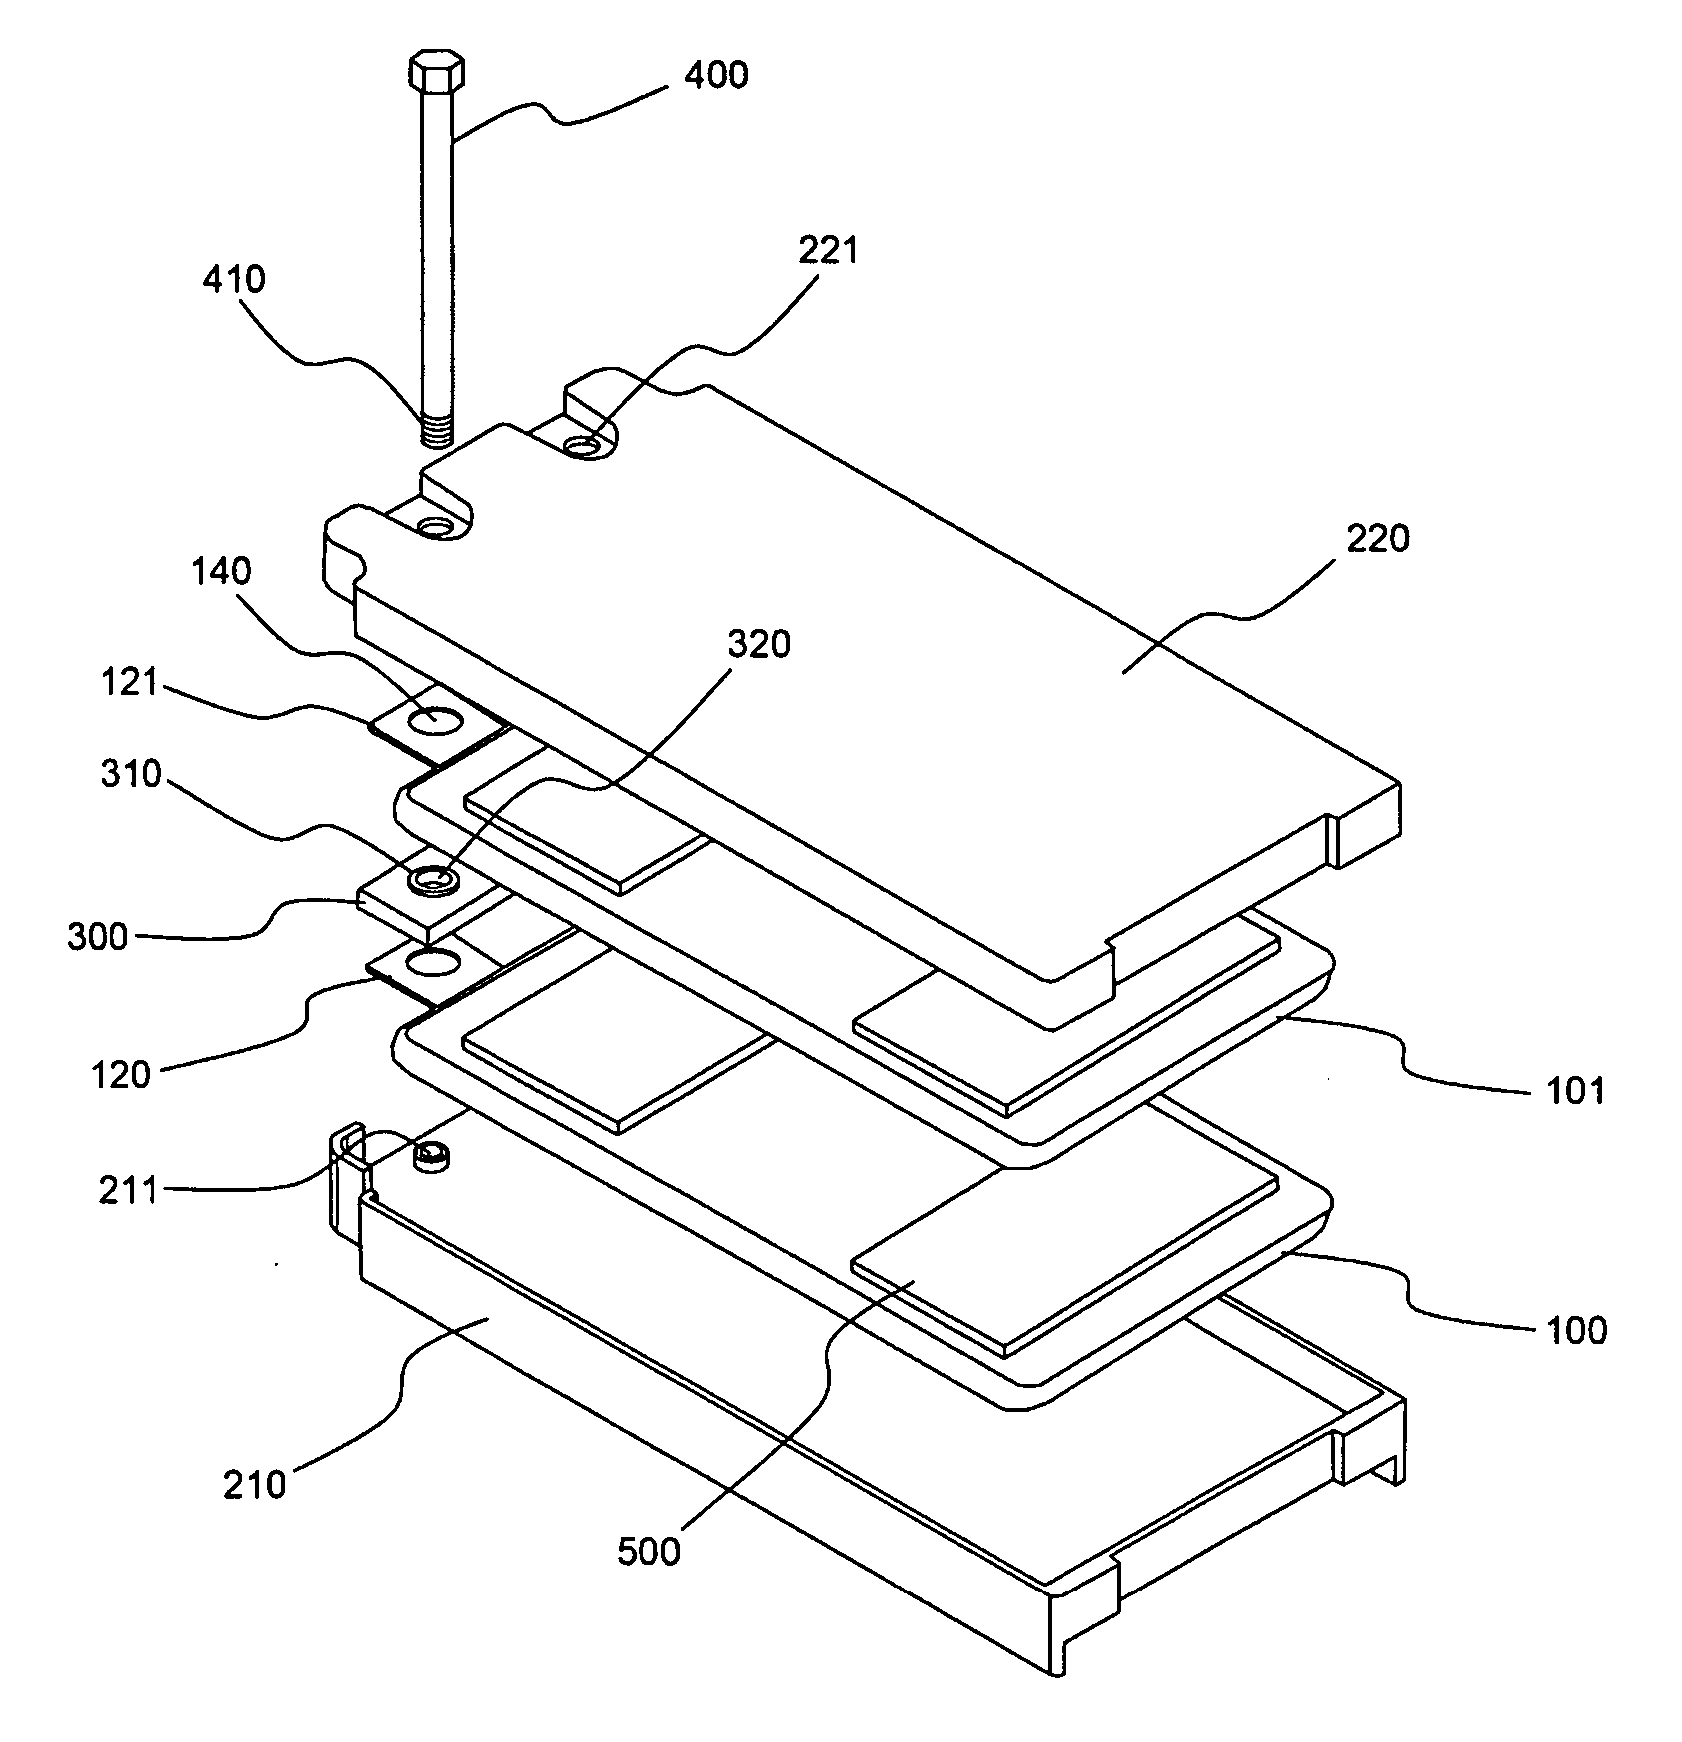 Process for preparation of secondary battery module